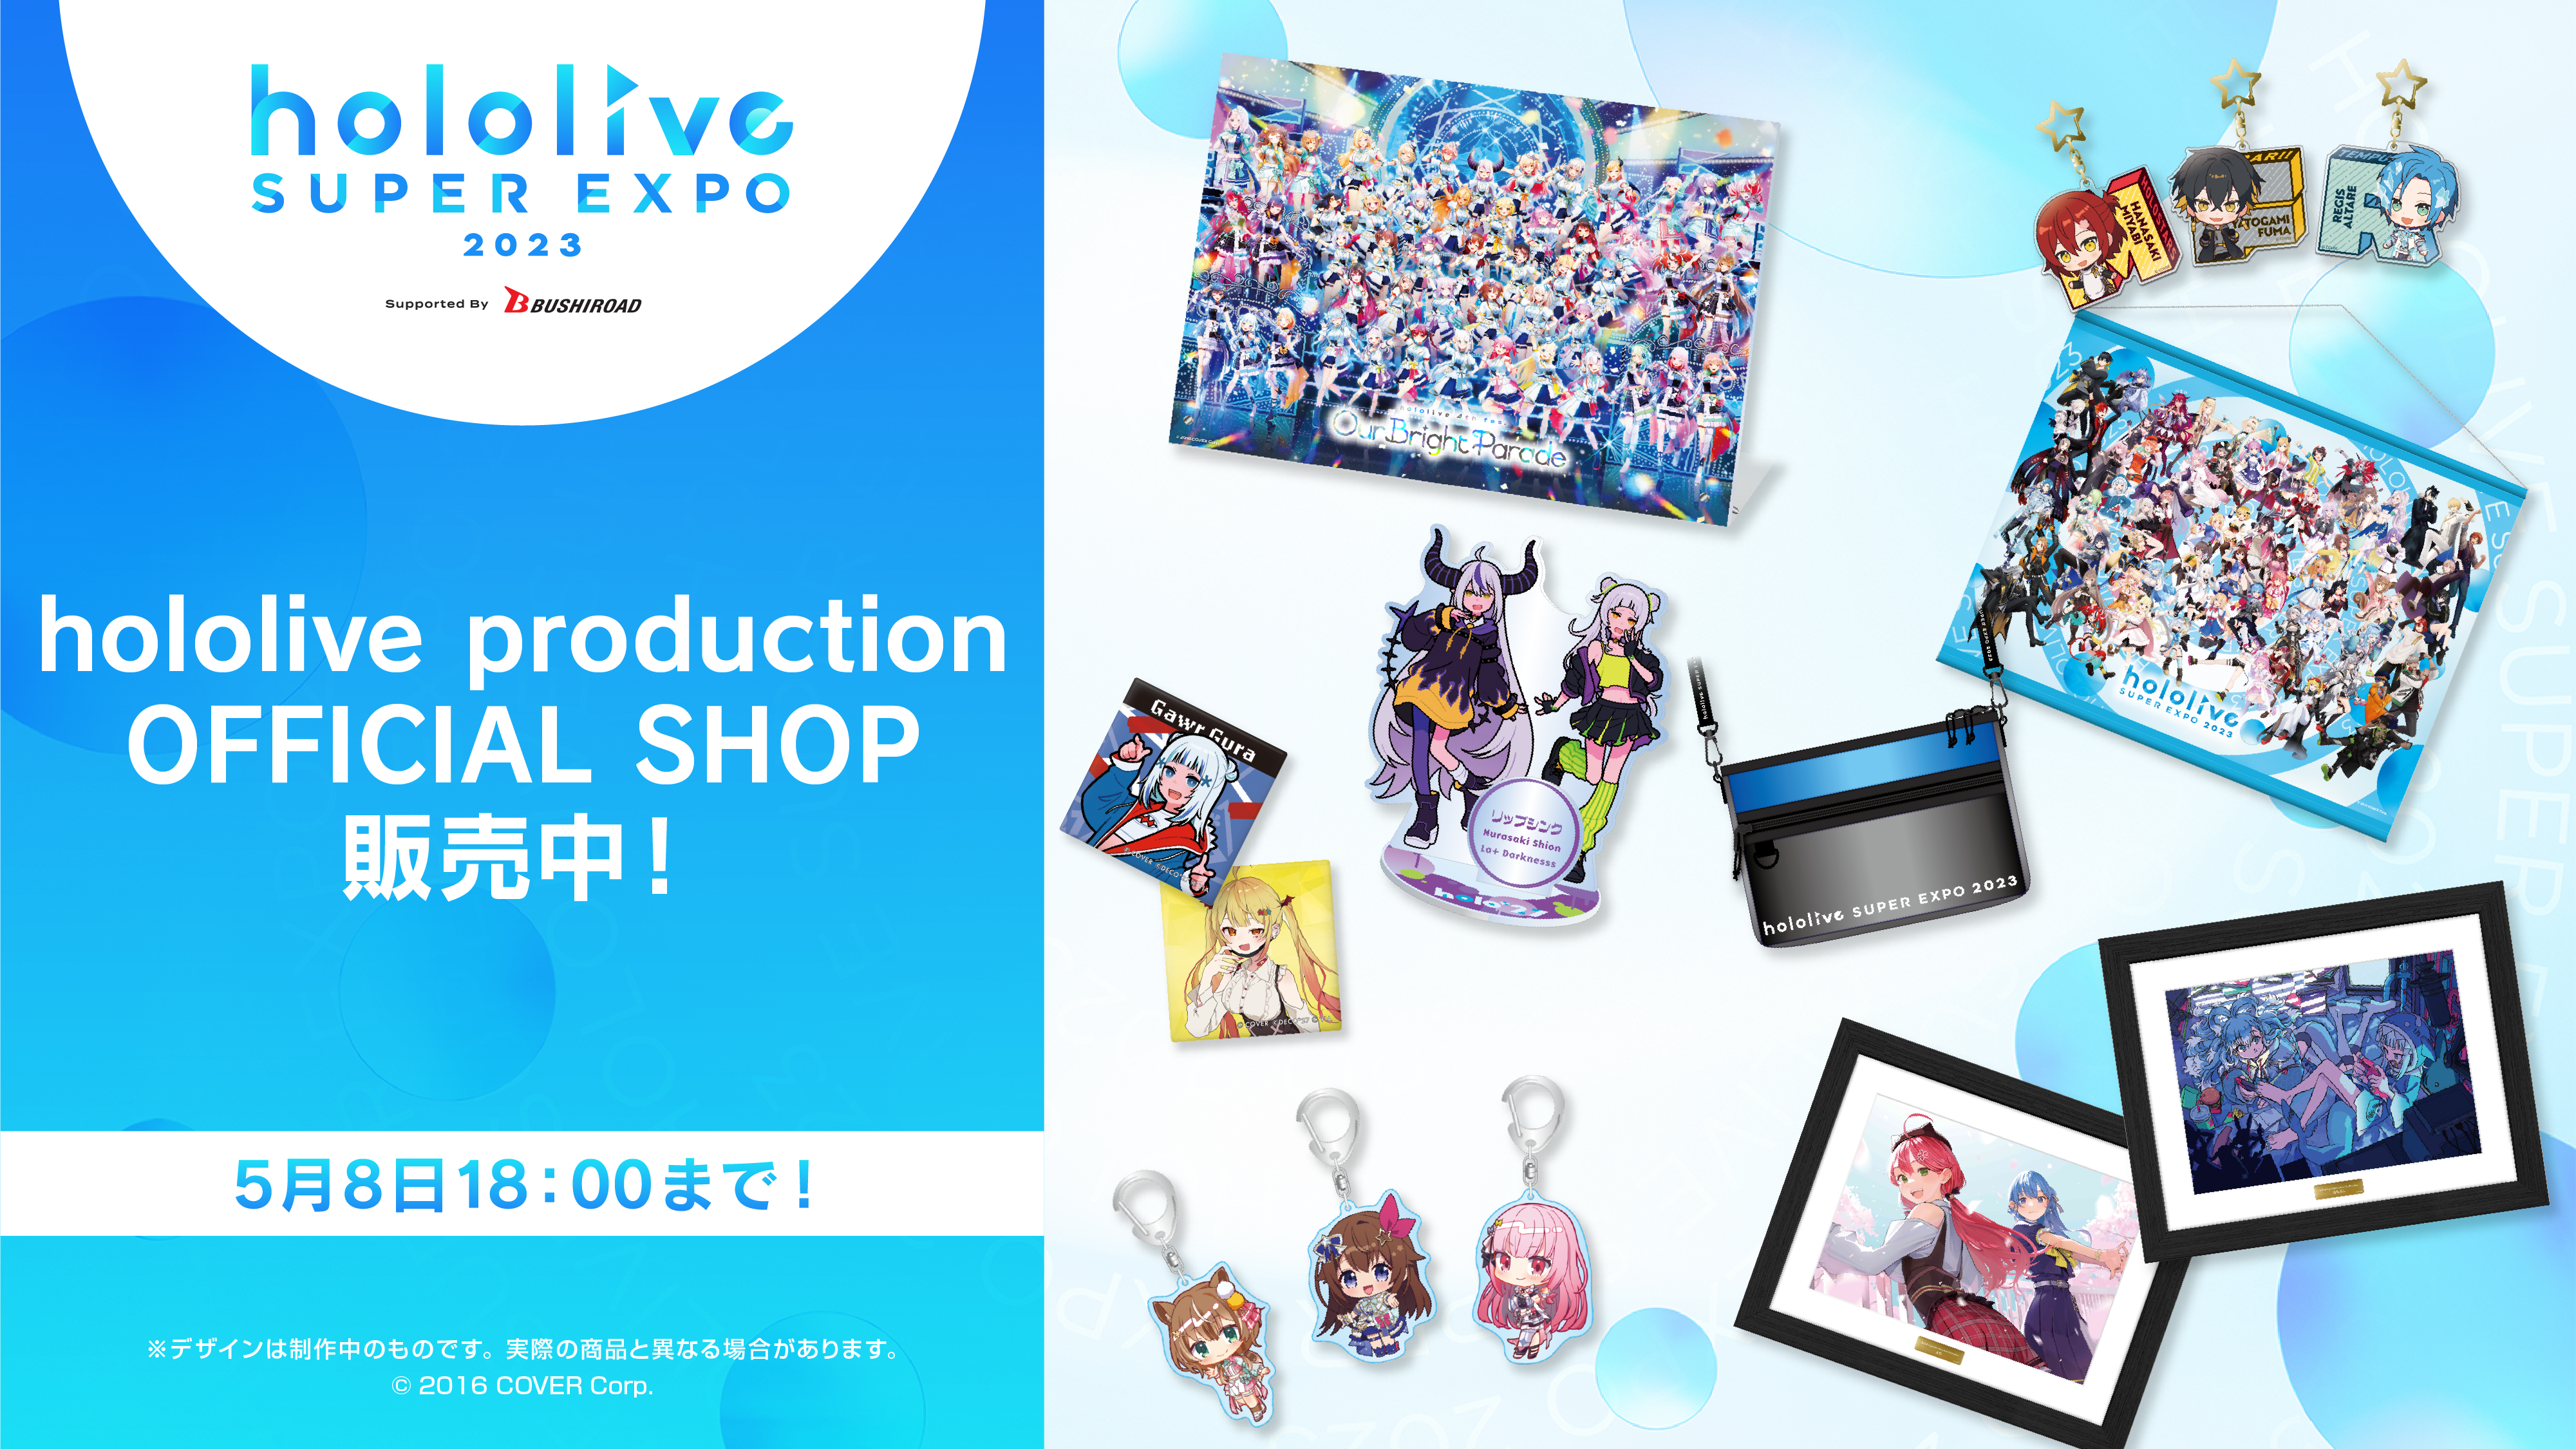 hololive SUPER EXPO 2023 グッズ特集 – hololive production official